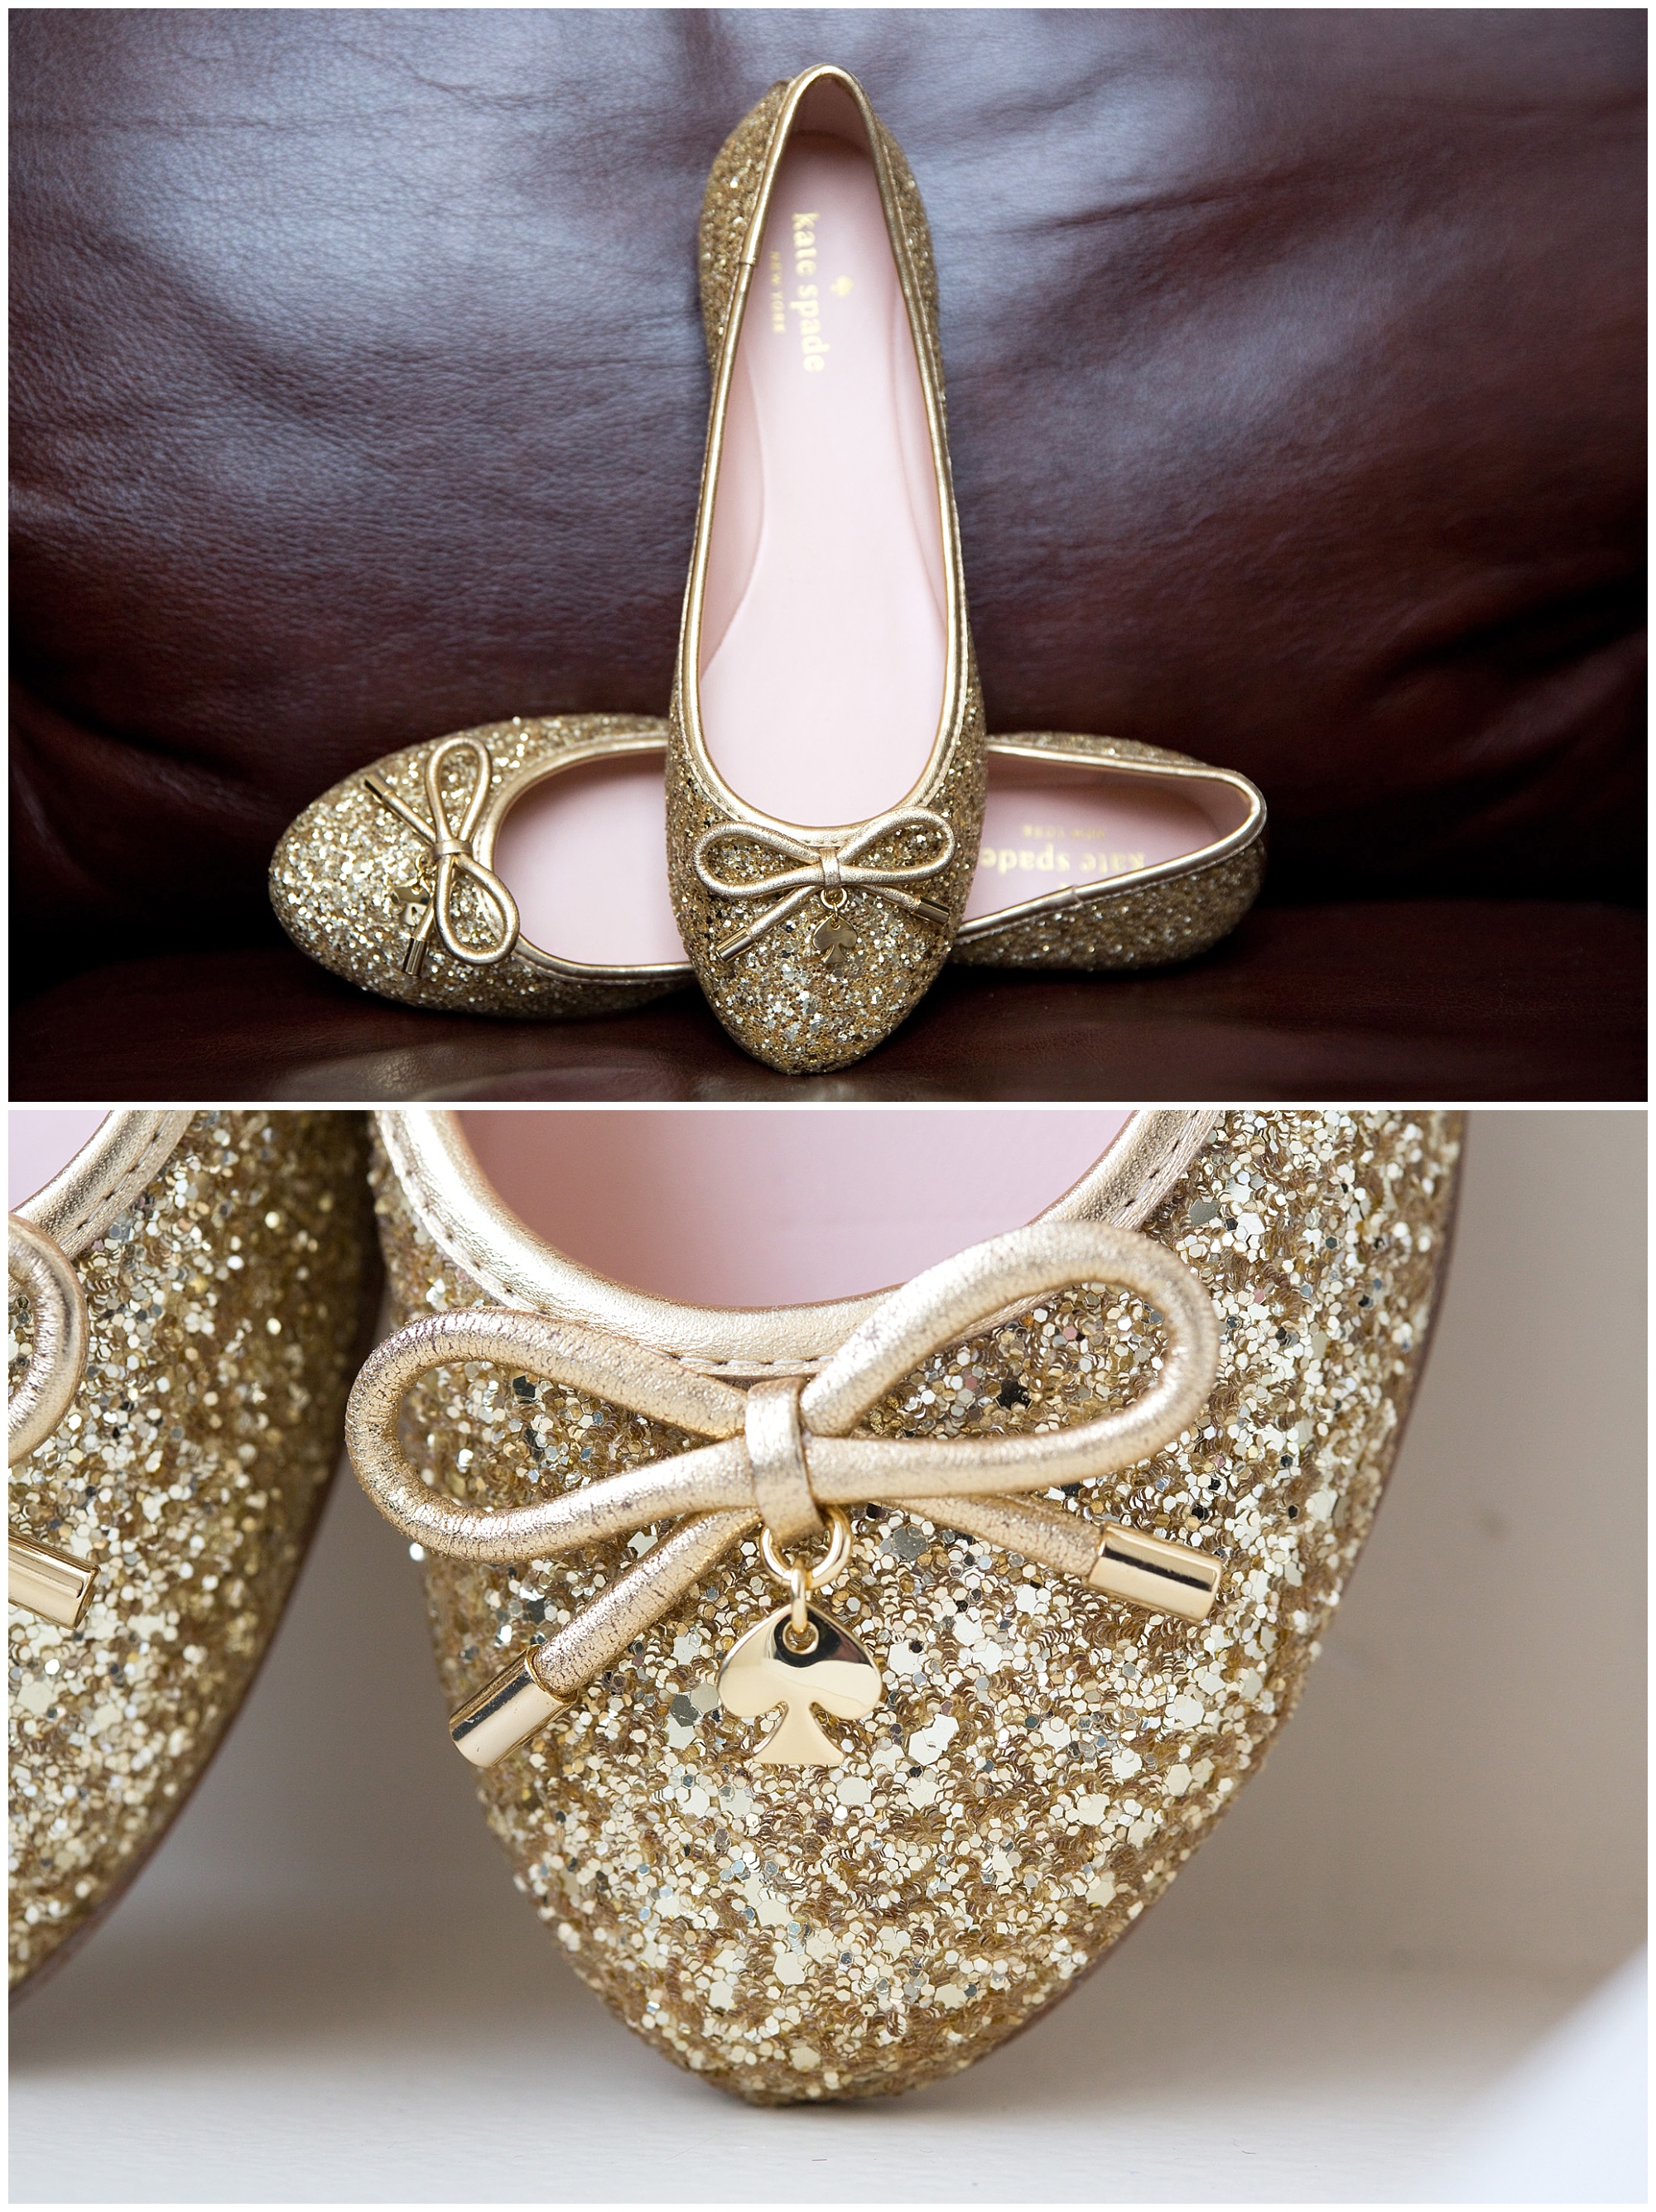 A photo of a brides golden shoes in two shots.